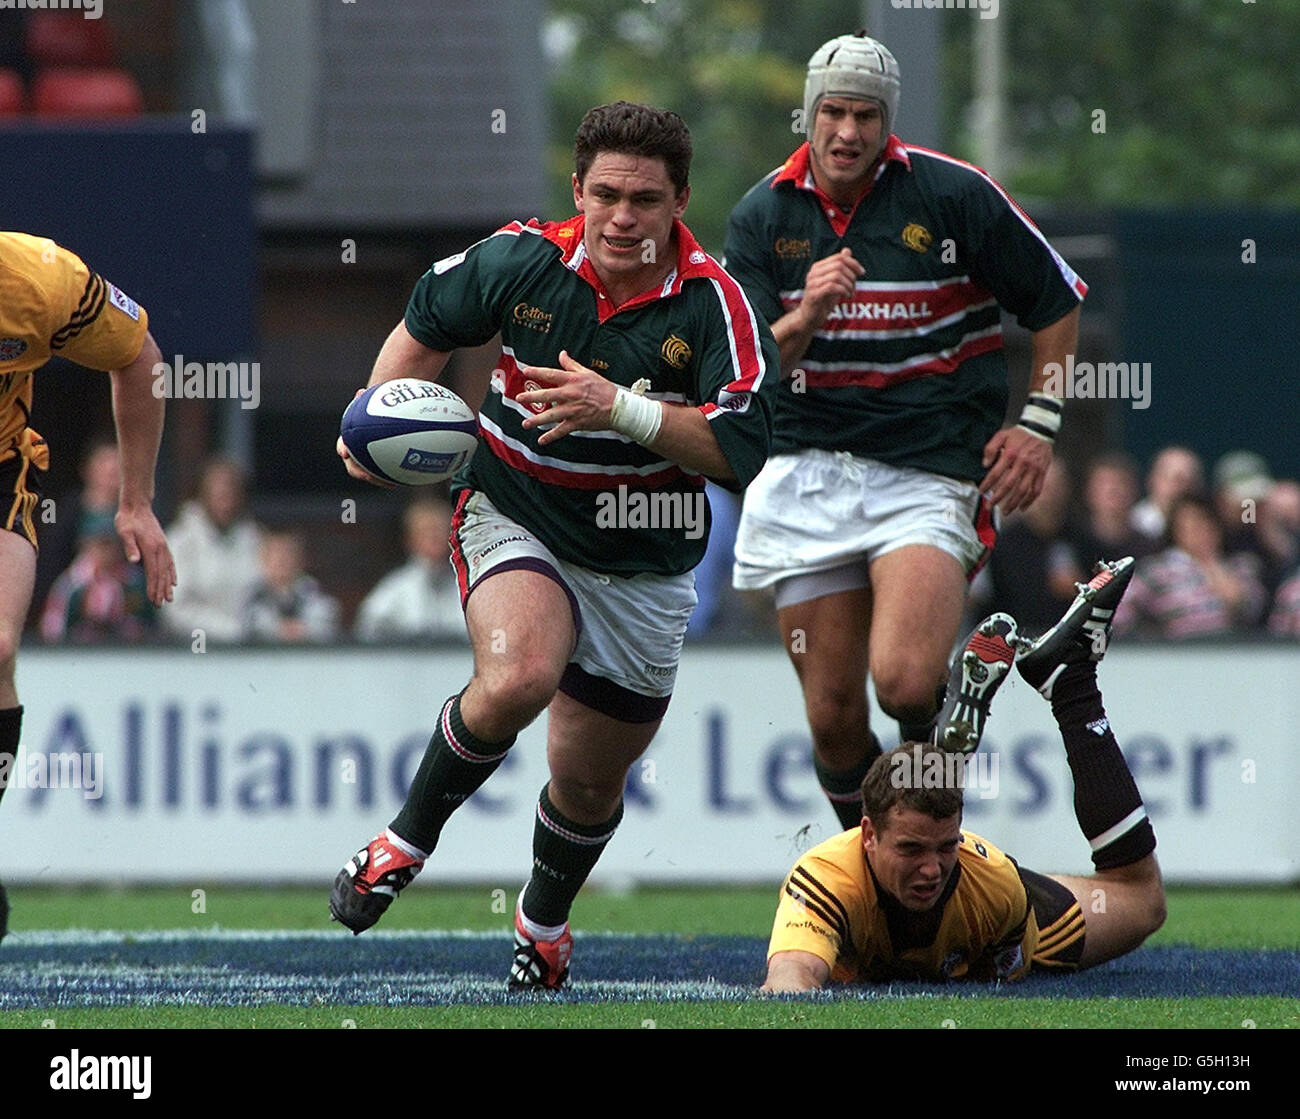 Leicester Tigers v Bath. Rod Kafer - Leicester Tigers, in action against Bath in the Zurich Premiership. Stock Photo